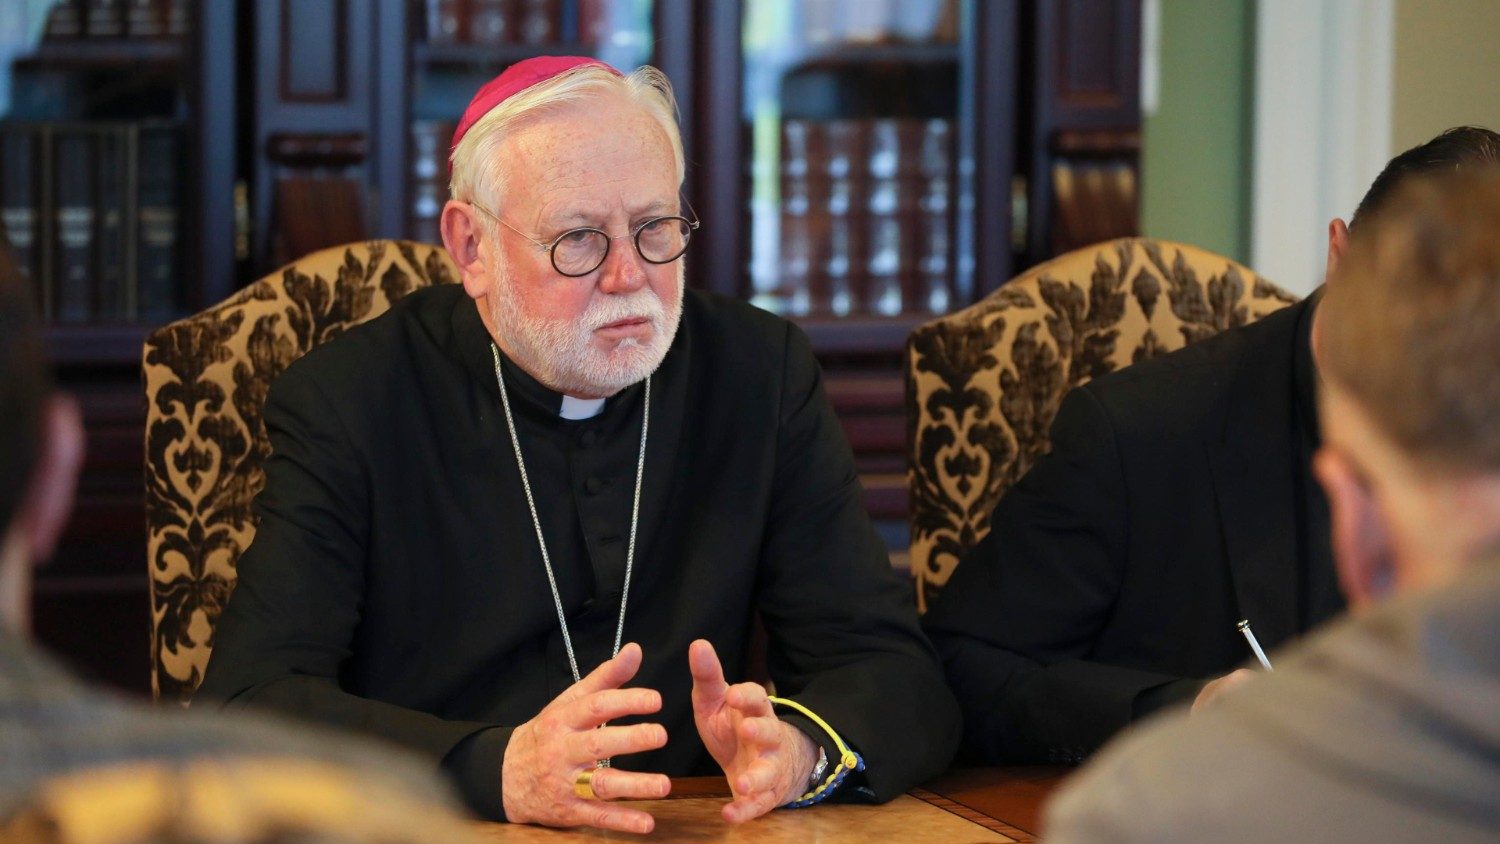 Archbishop Gallagher: Caritas’ humanitarian mission "more needed than ever" - Vatican News